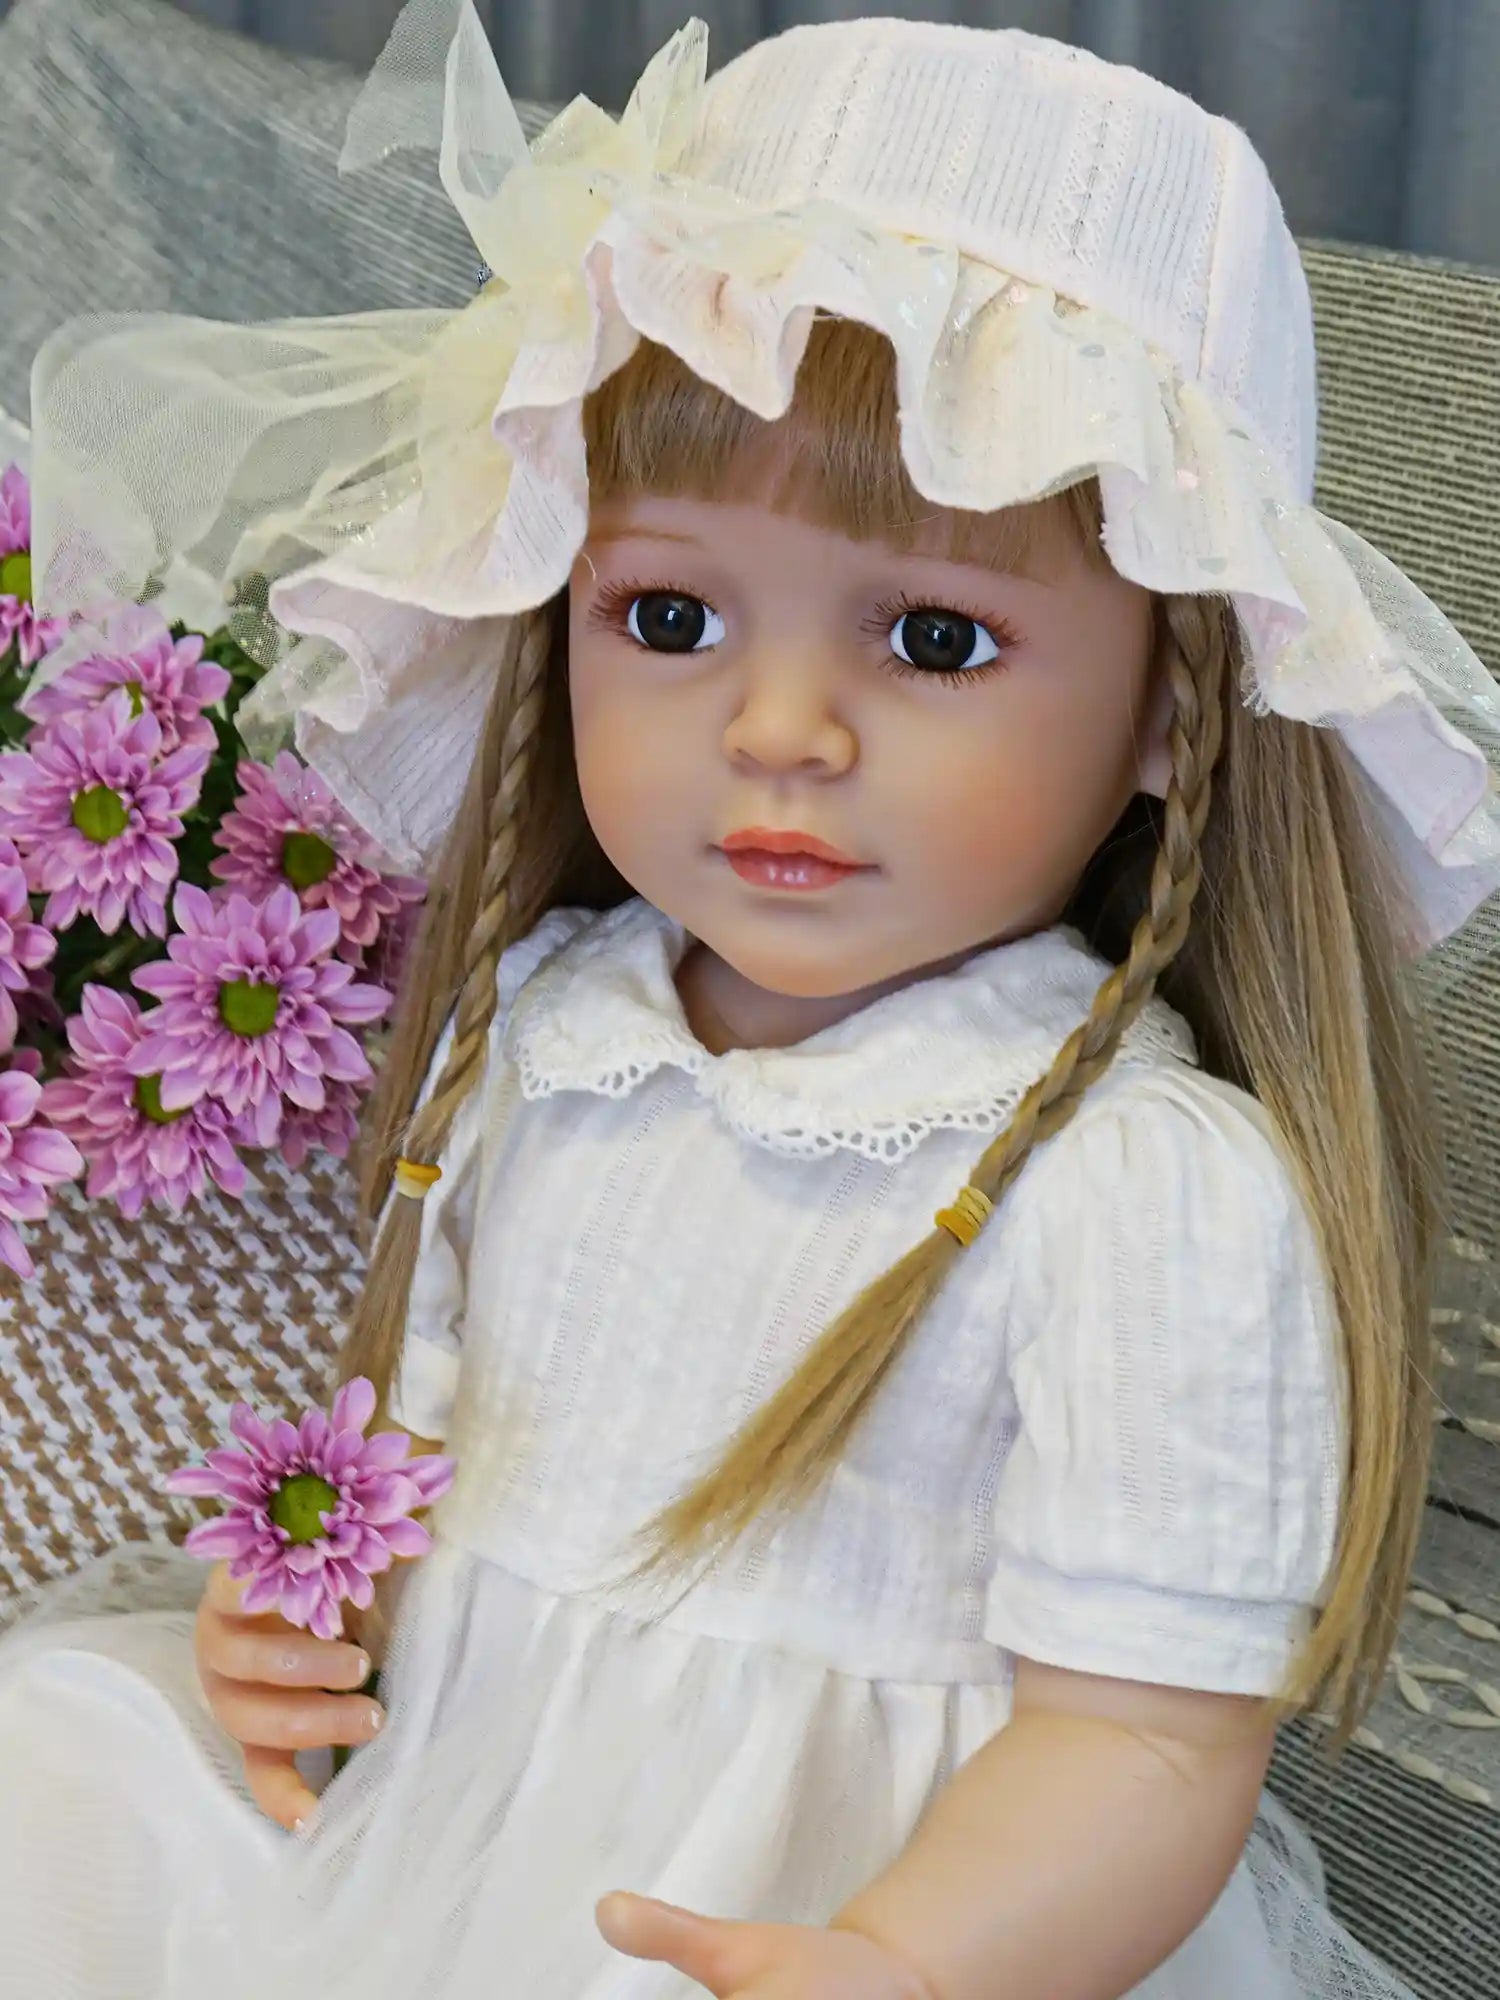 Doll with braided hair and a frilly yellow hat, white dress, on a textured chair.